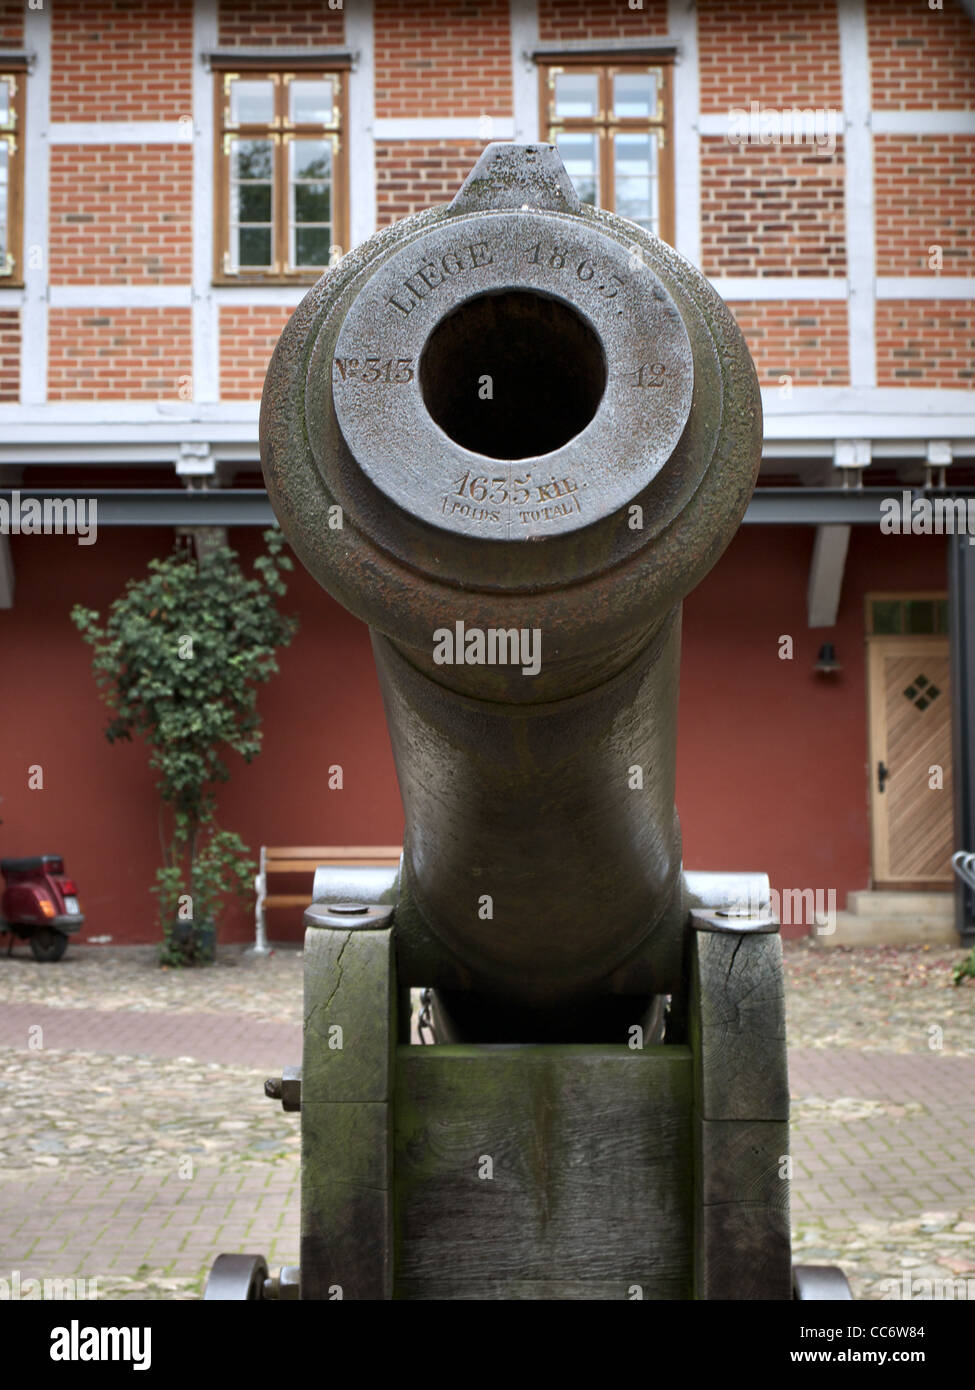 Cannon on the court of Winsen Castle, Winsen Luhe, Germany. Stock Photo